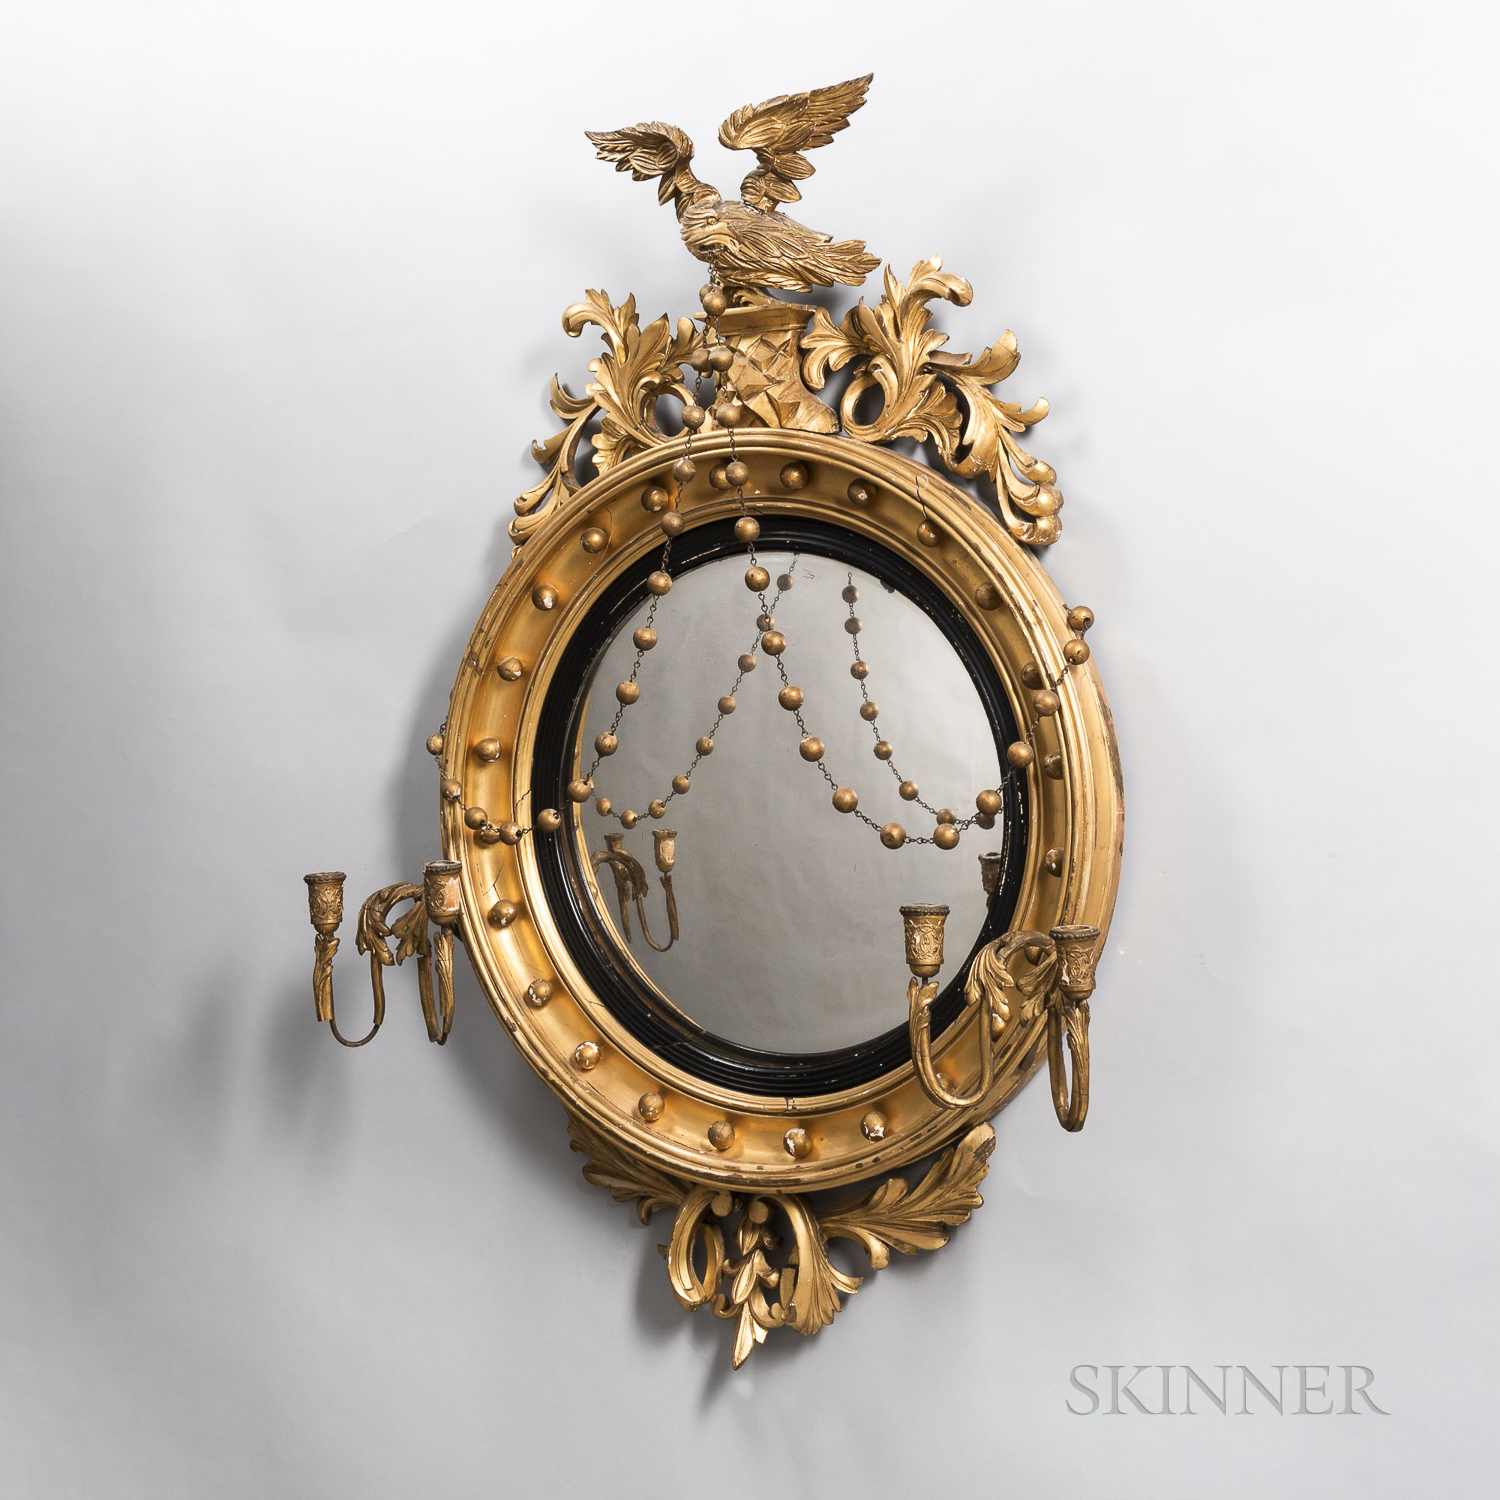 Neoclassical Giltwood Convex Mirror, with an eagle crest supporting pendant swags, with a pair of lo